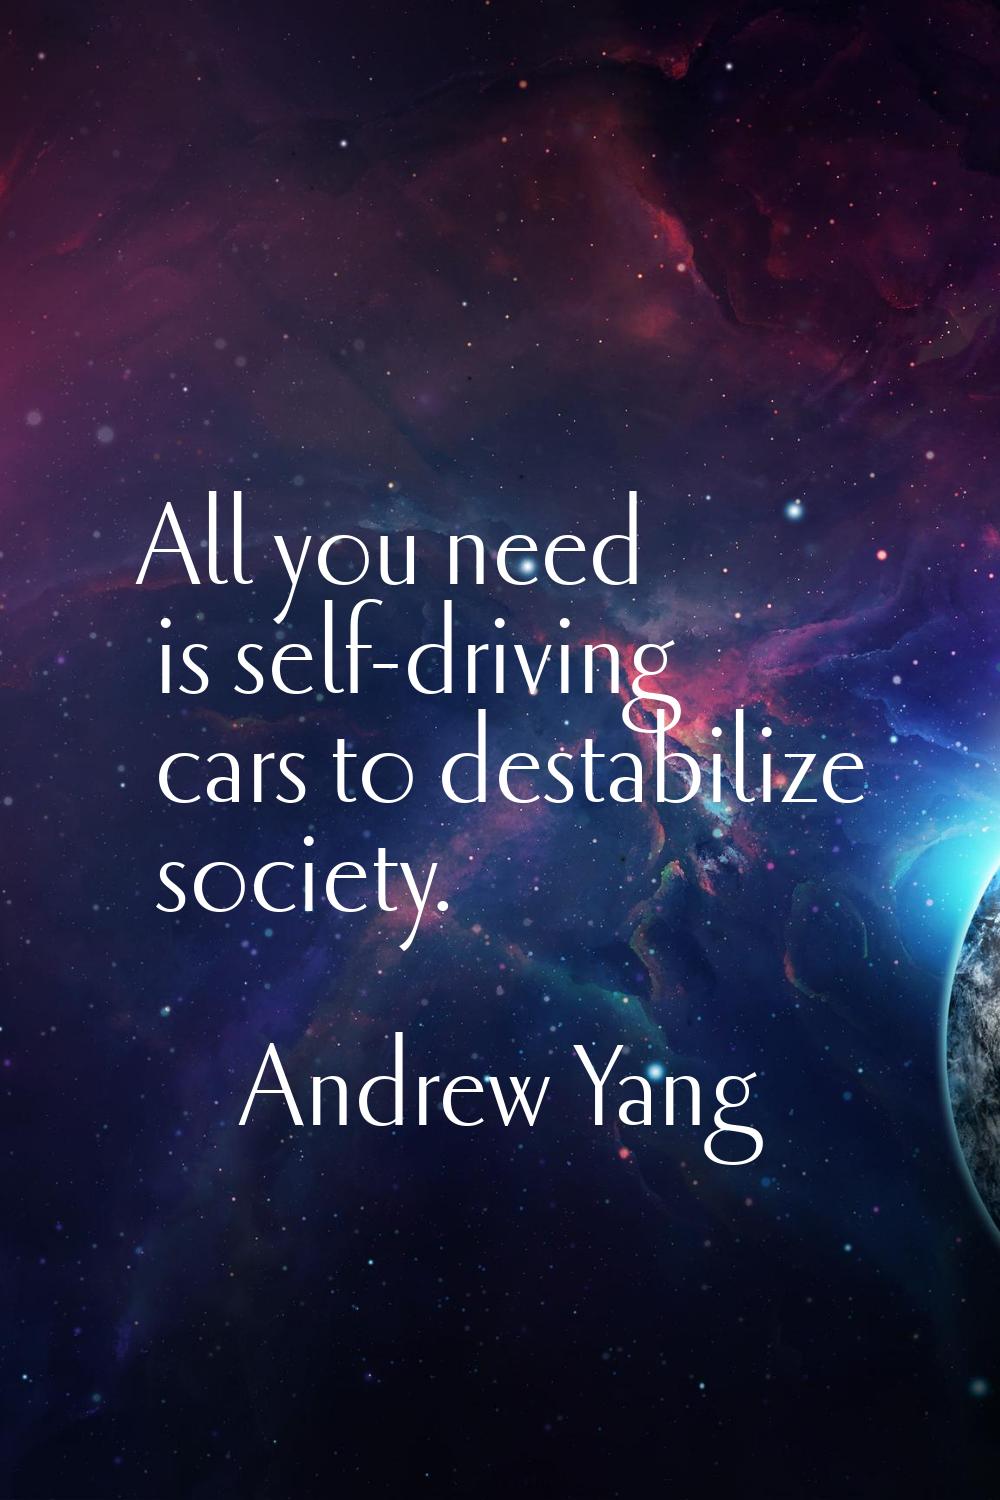 All you need is self-driving cars to destabilize society.